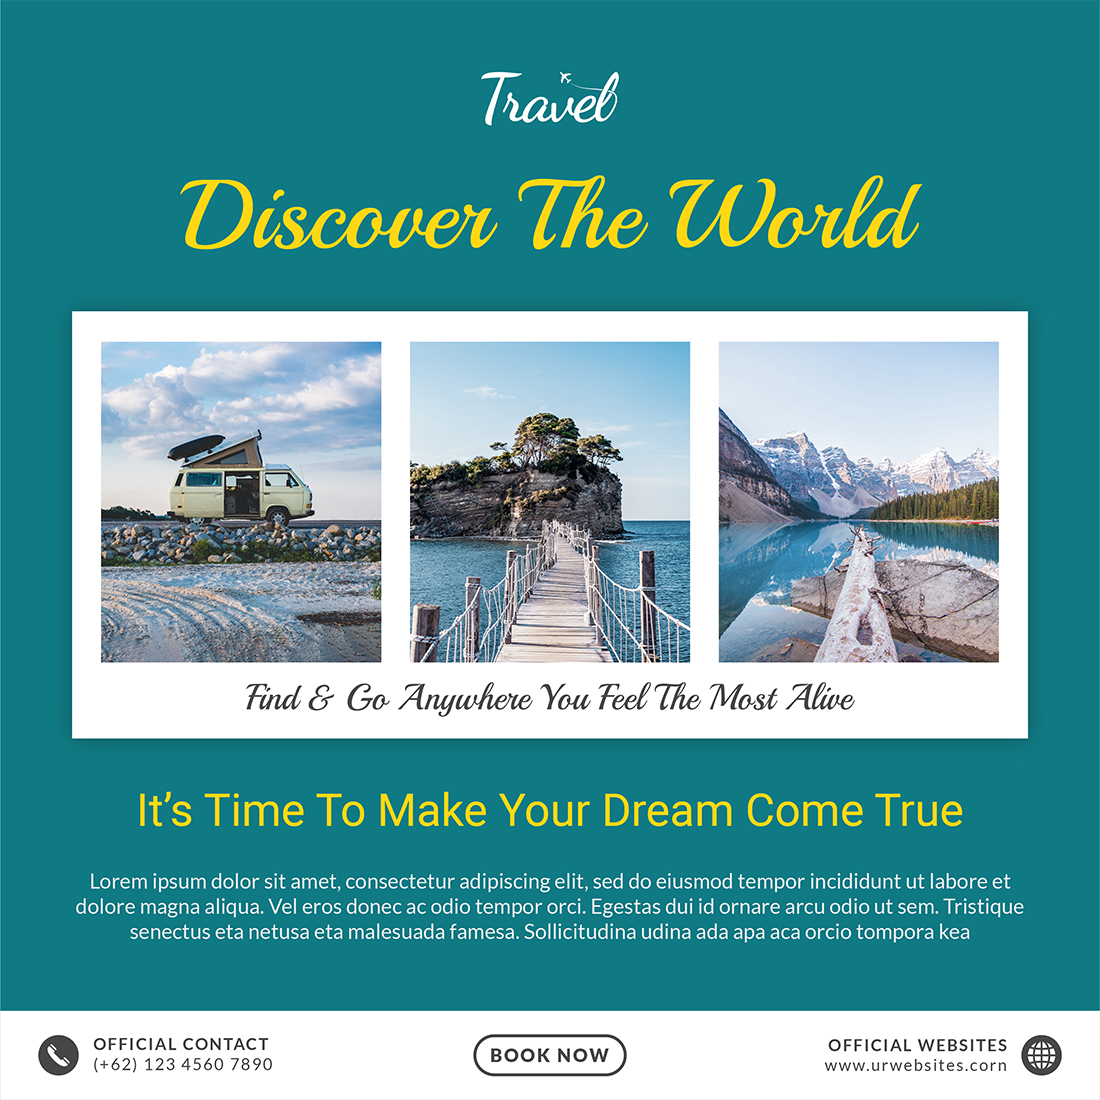 Leisure & Travel Social Media Post Templates discover the world.